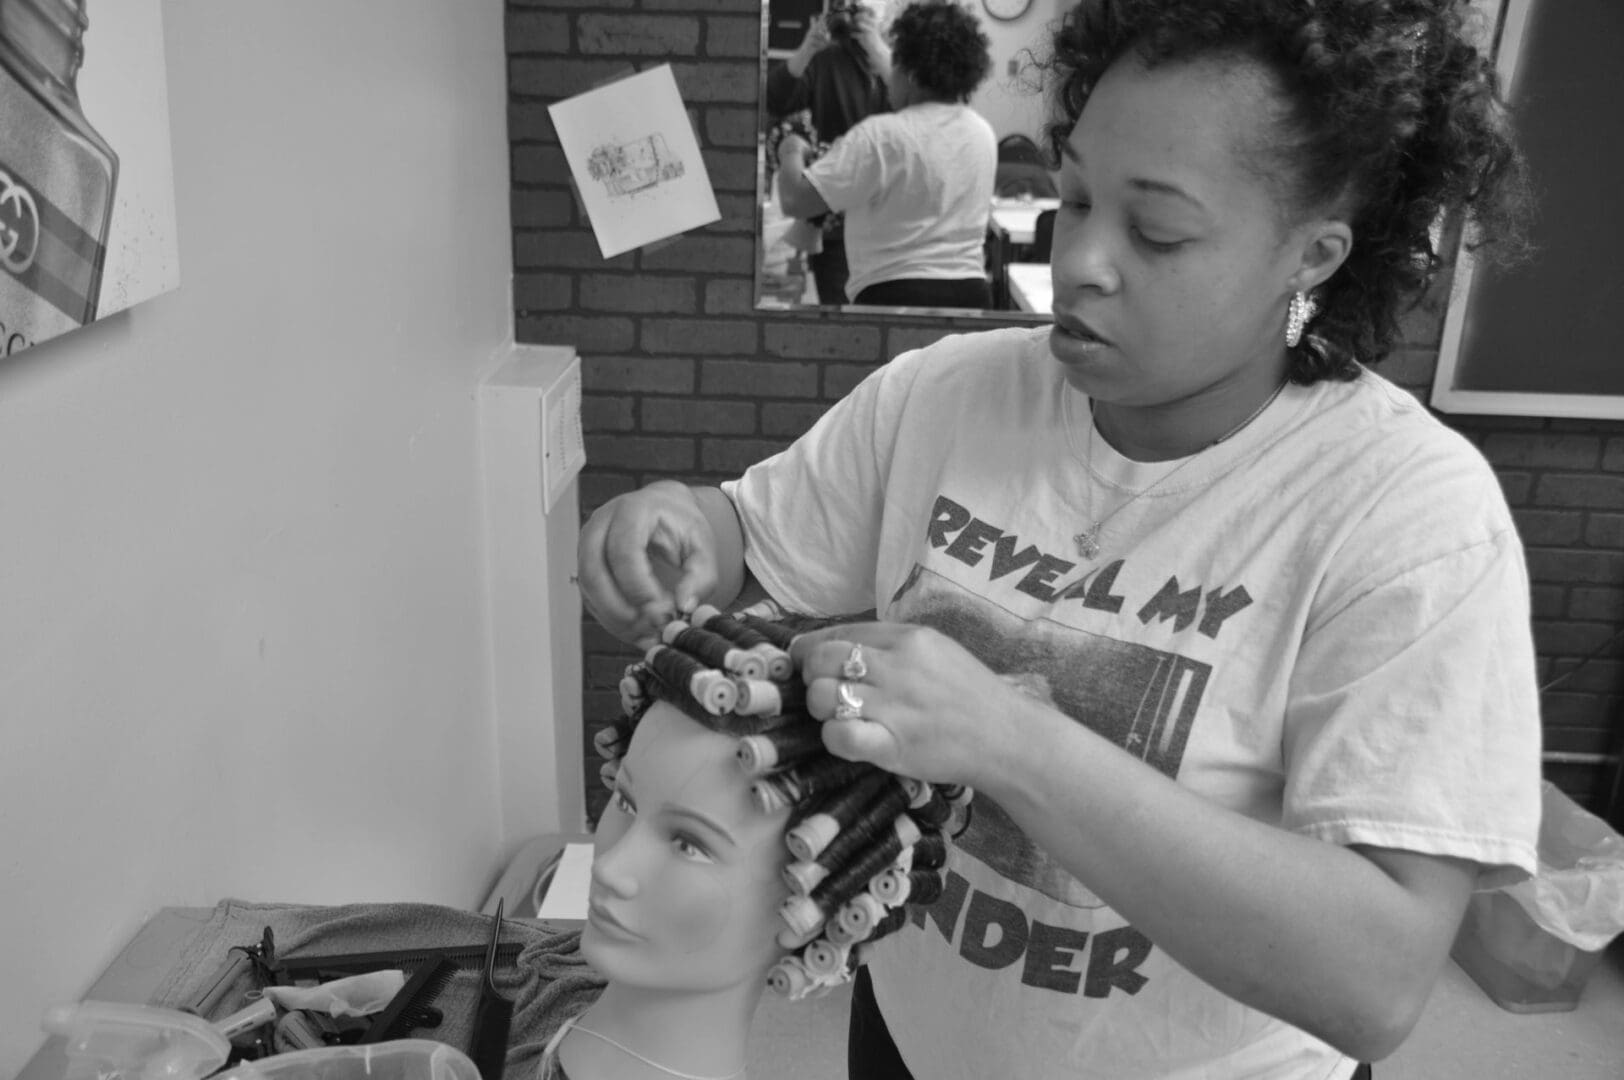 A woman is getting her hair done by another person.